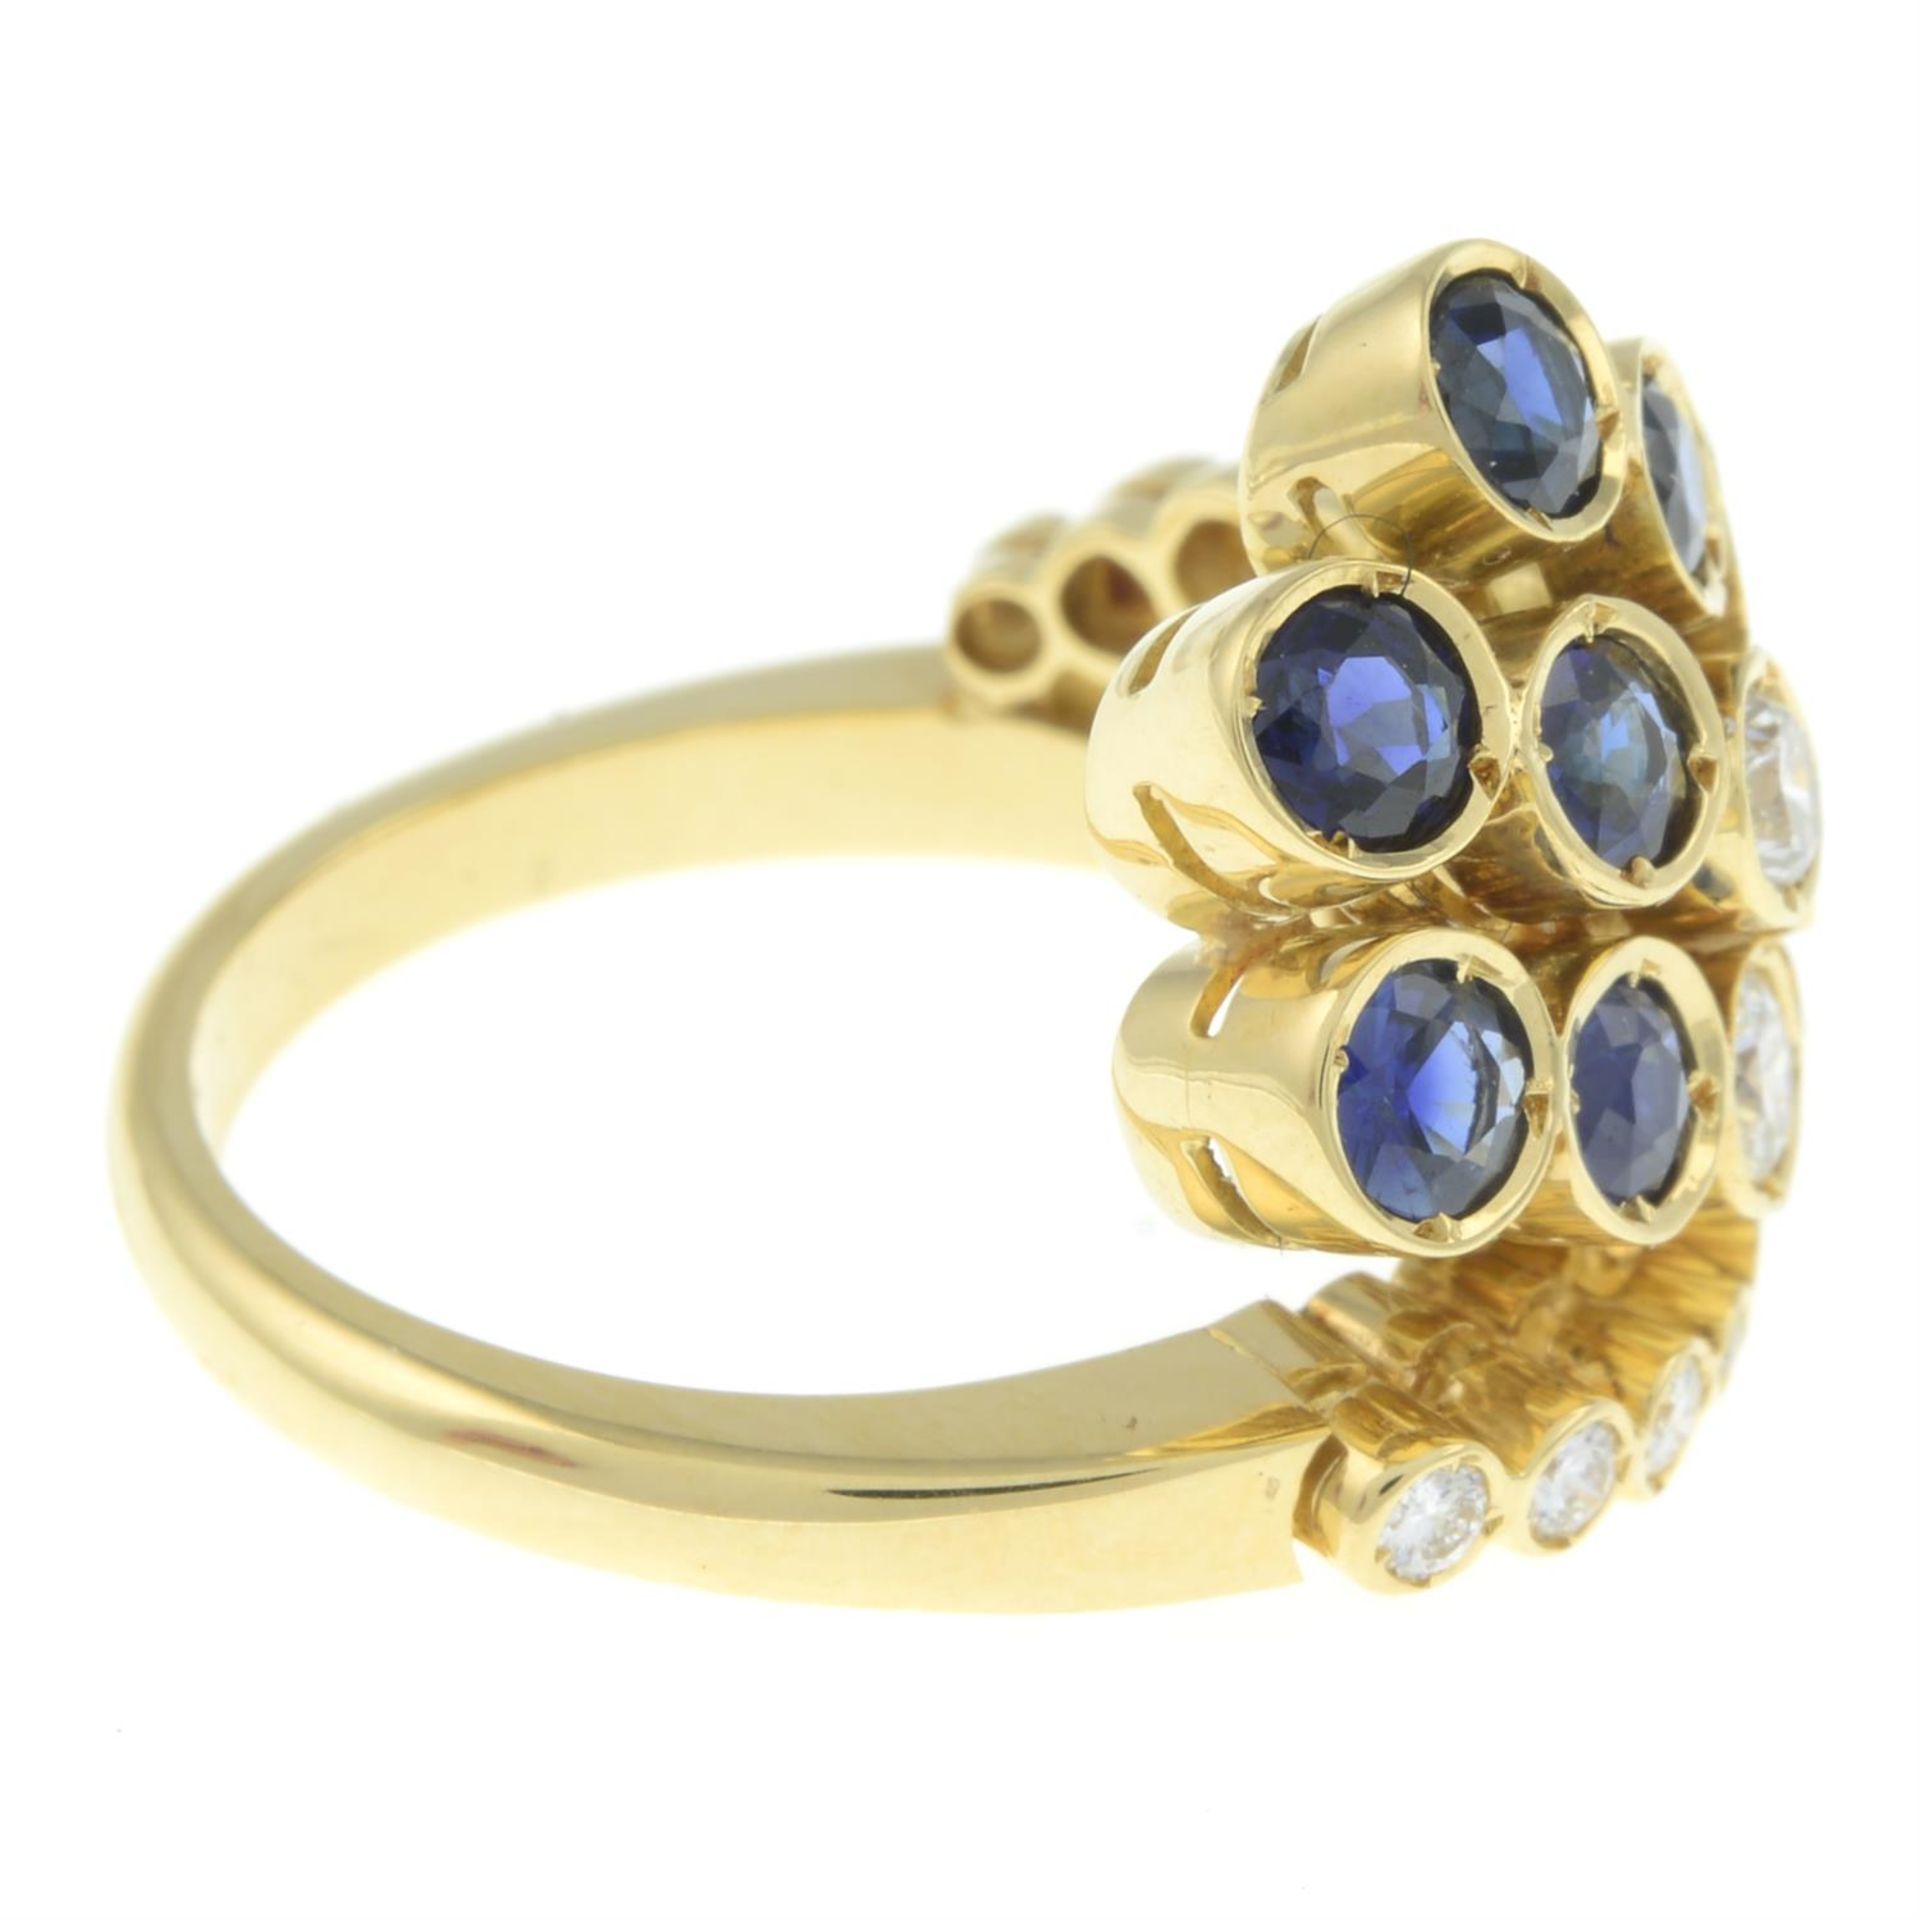 18ct gold sapphire and diamond ring, by Mappin & Webb - Image 4 of 5